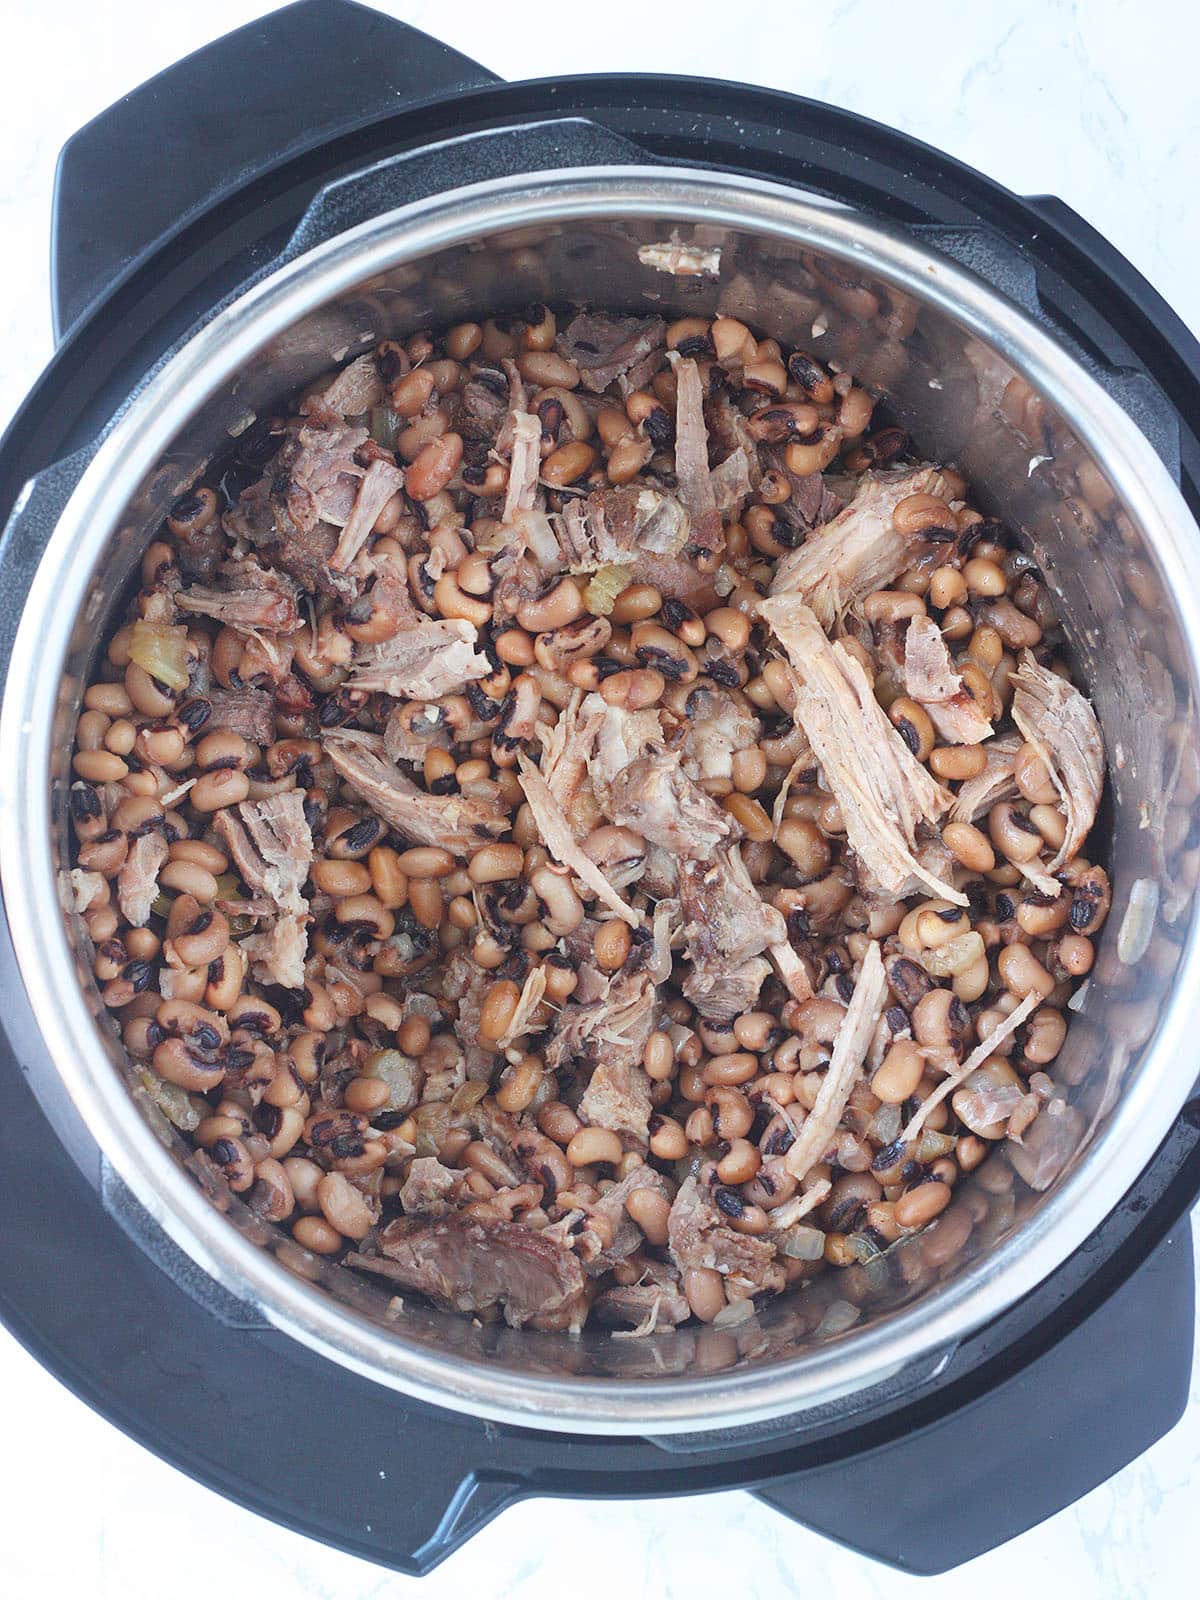 Overhead shot of cooked black-eyed peas with shredded pork in an Instant Pot